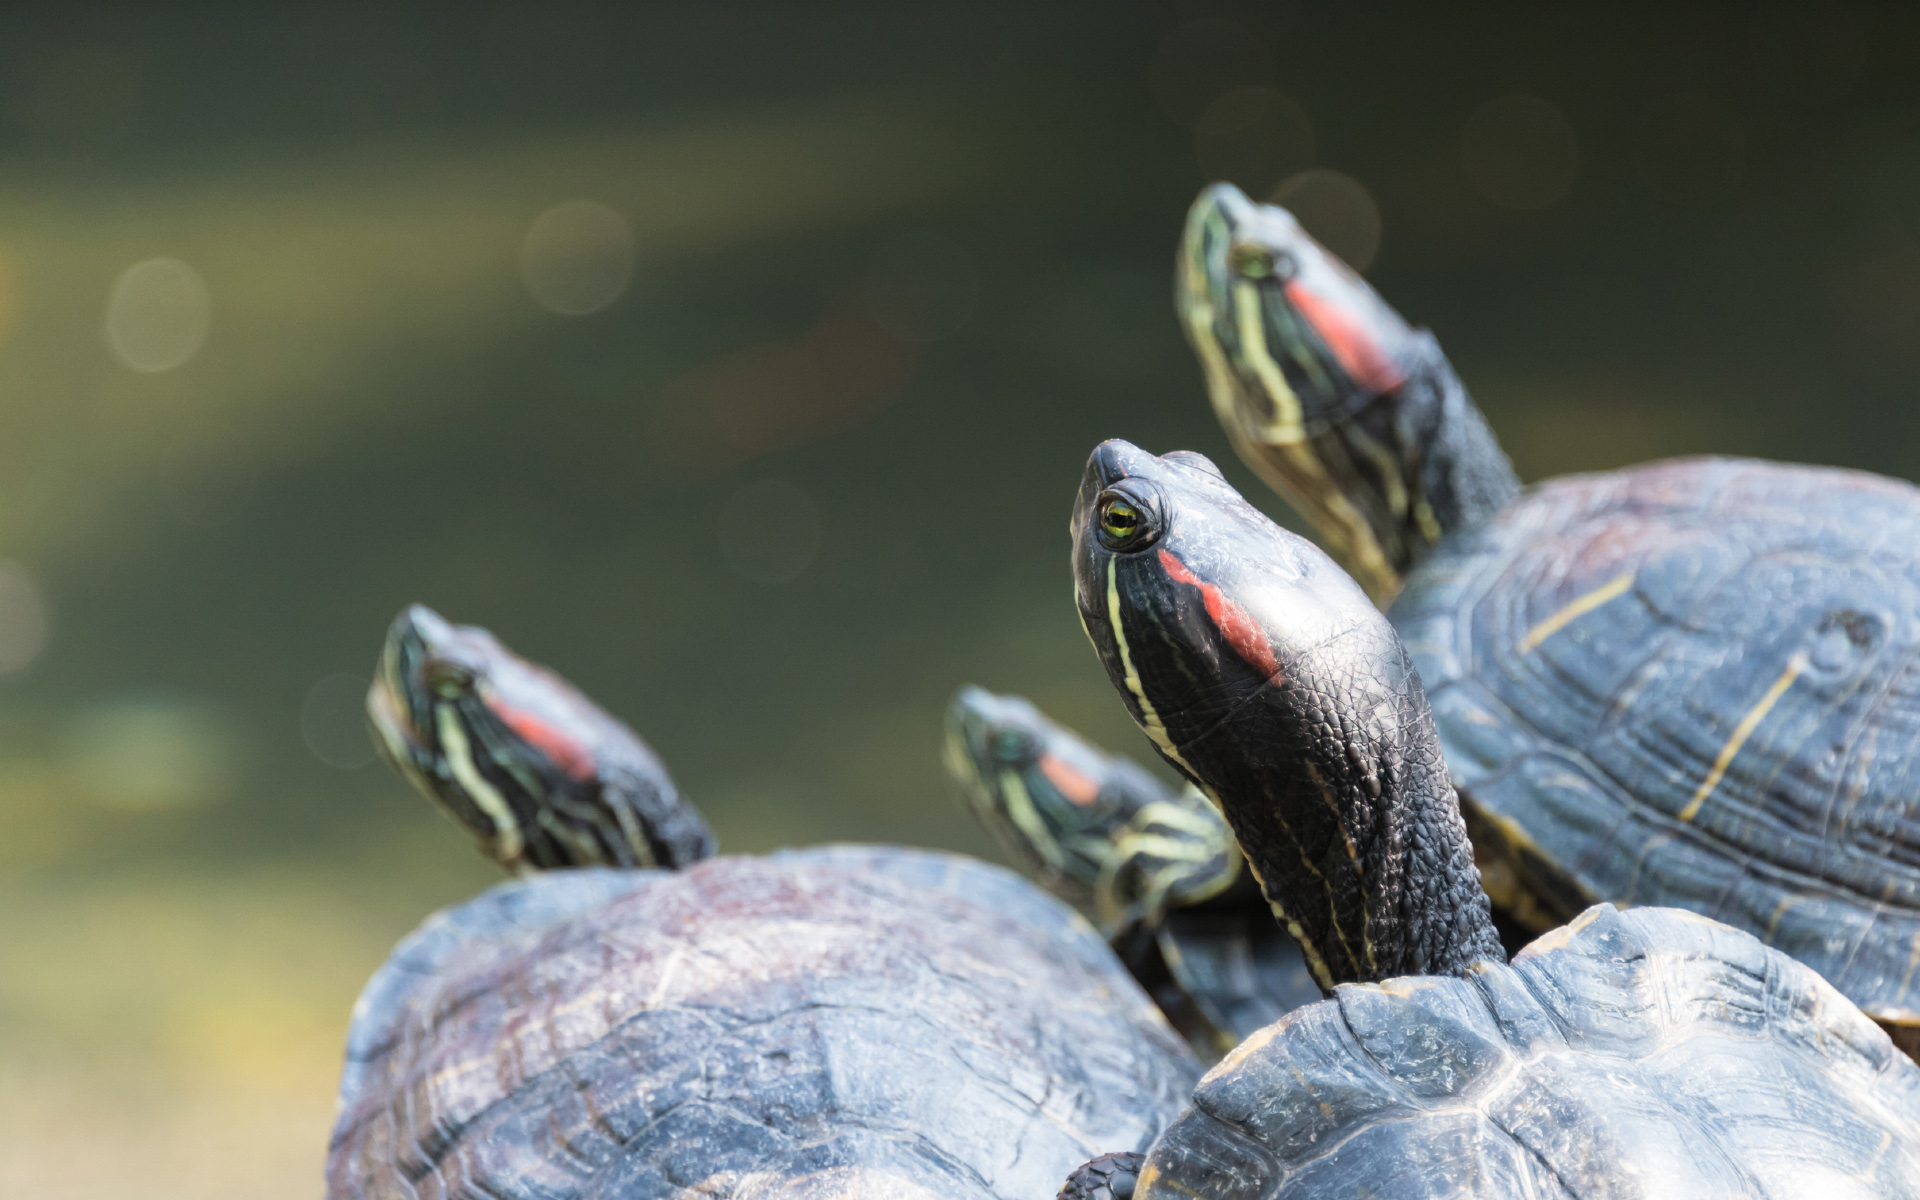 Group Of Red Eared Slider Turtles Wallpaper Wiki